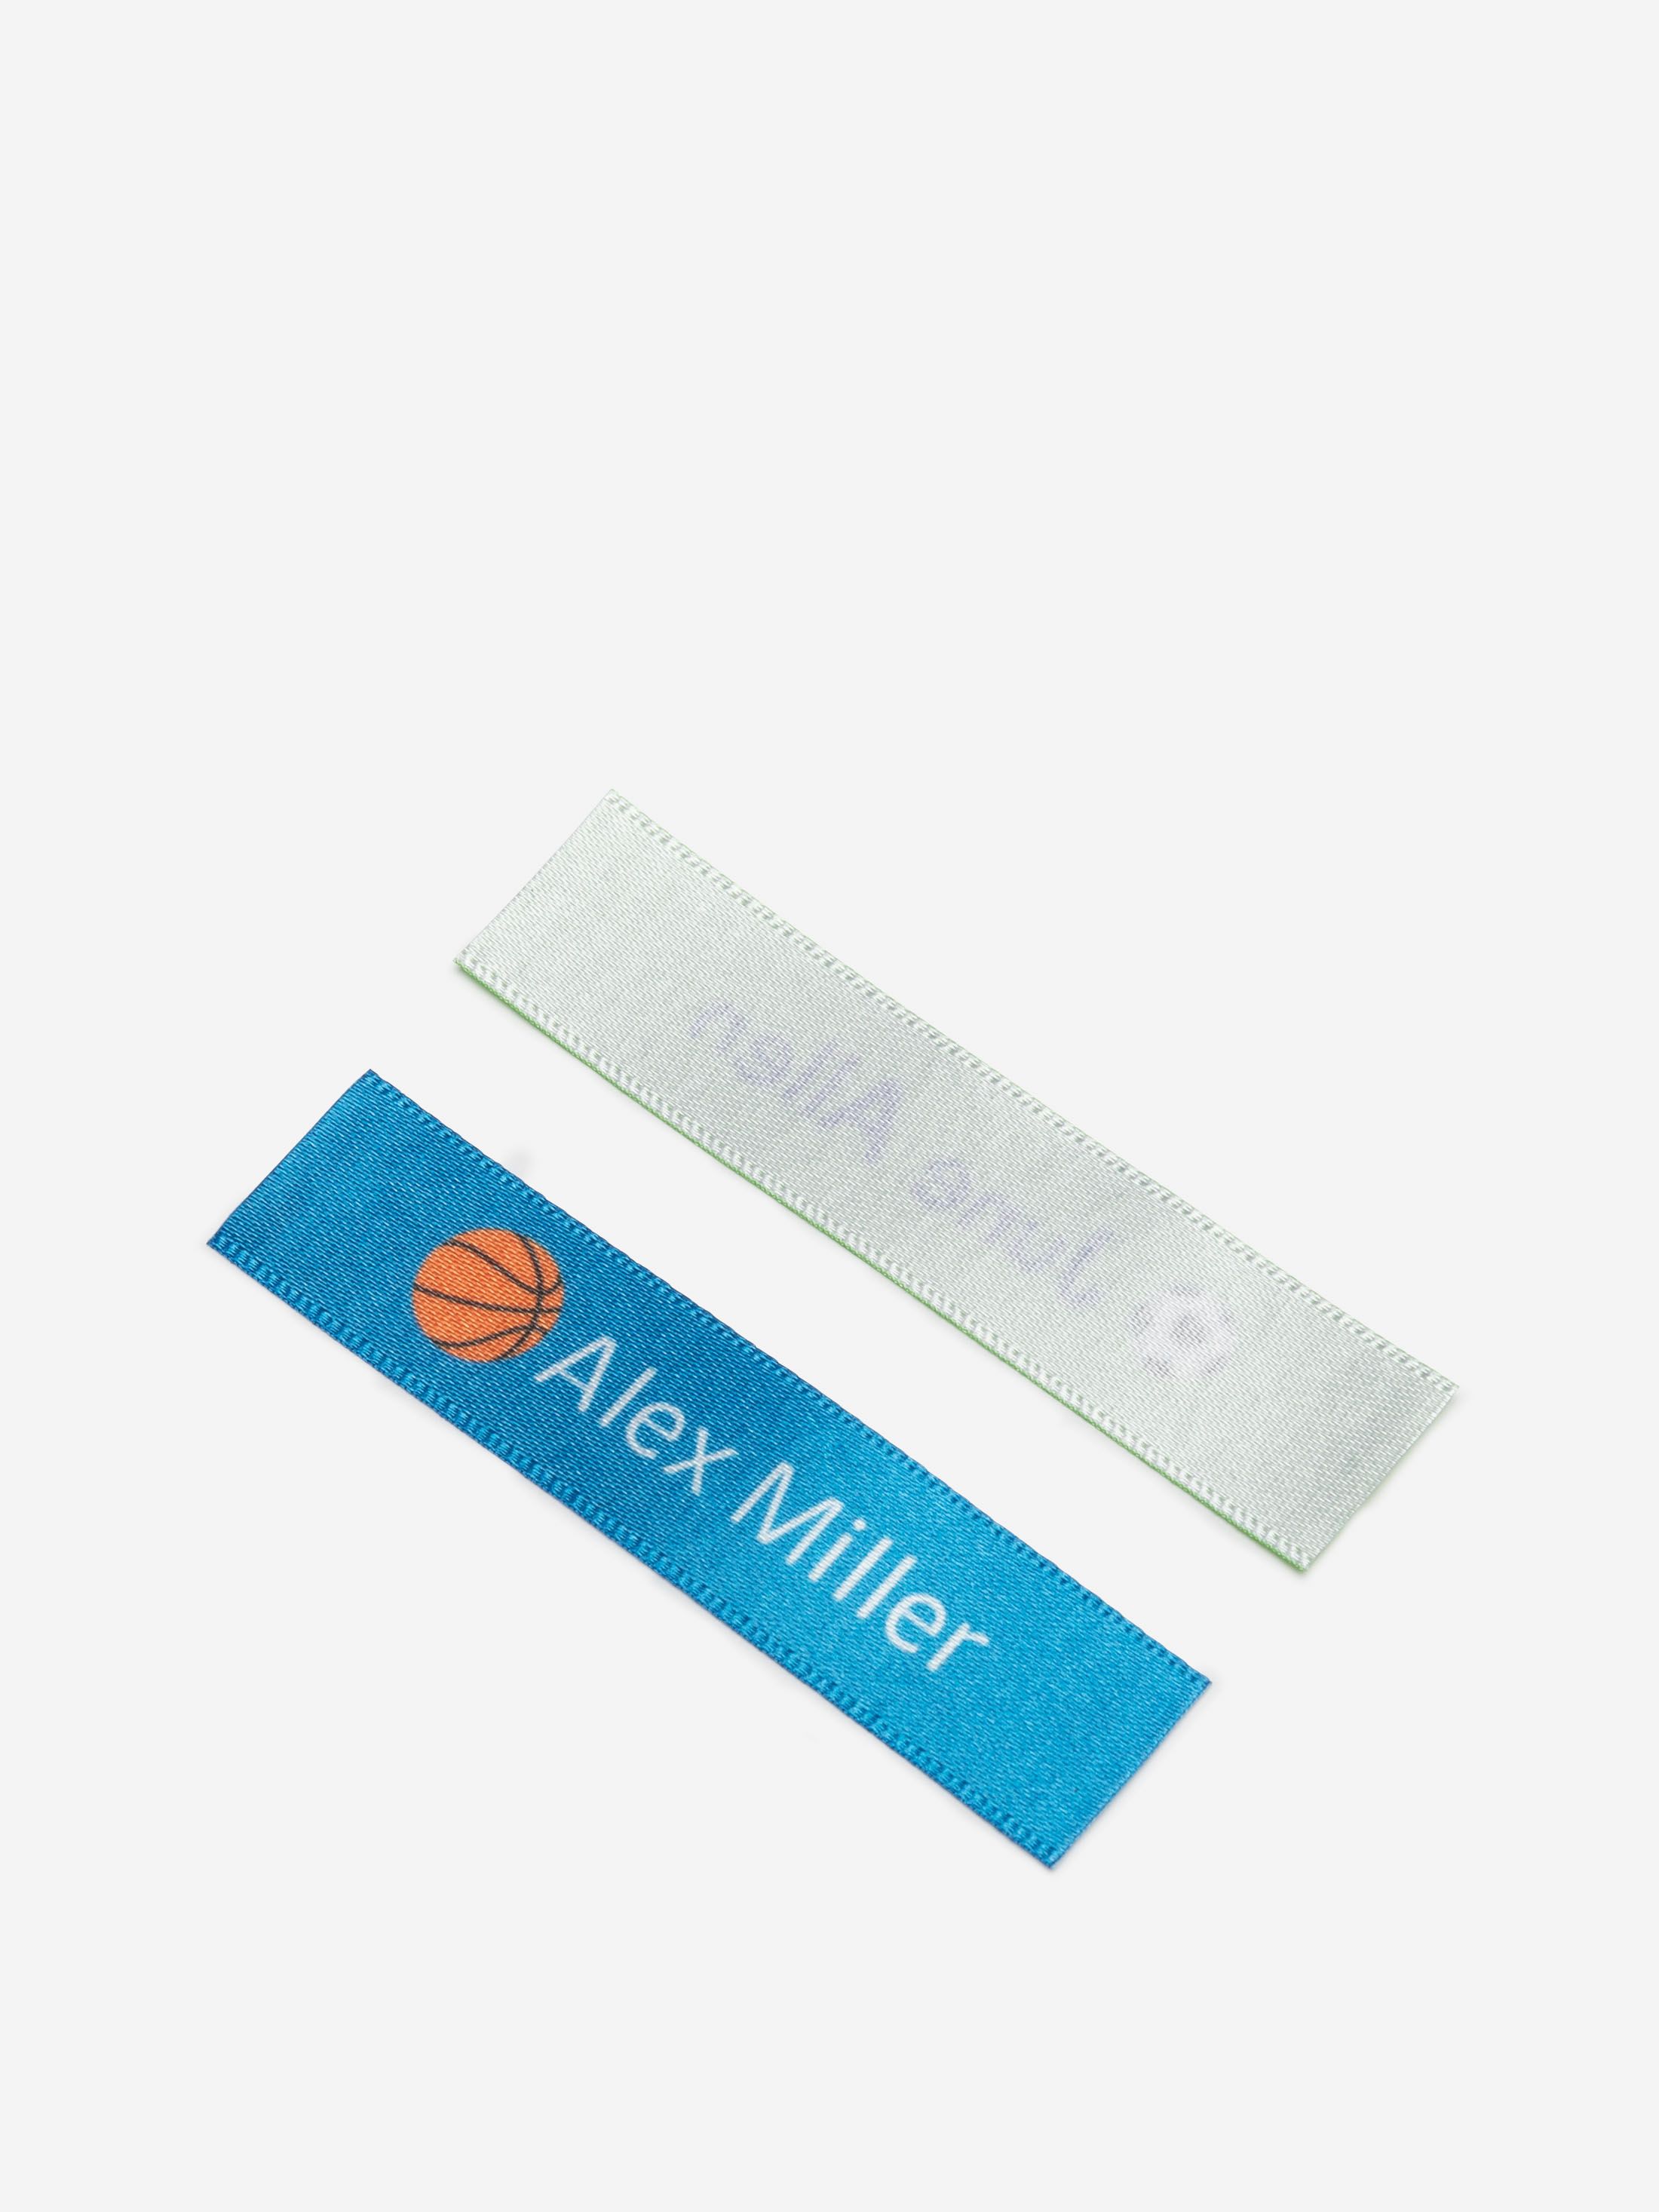 fabric name label front and back